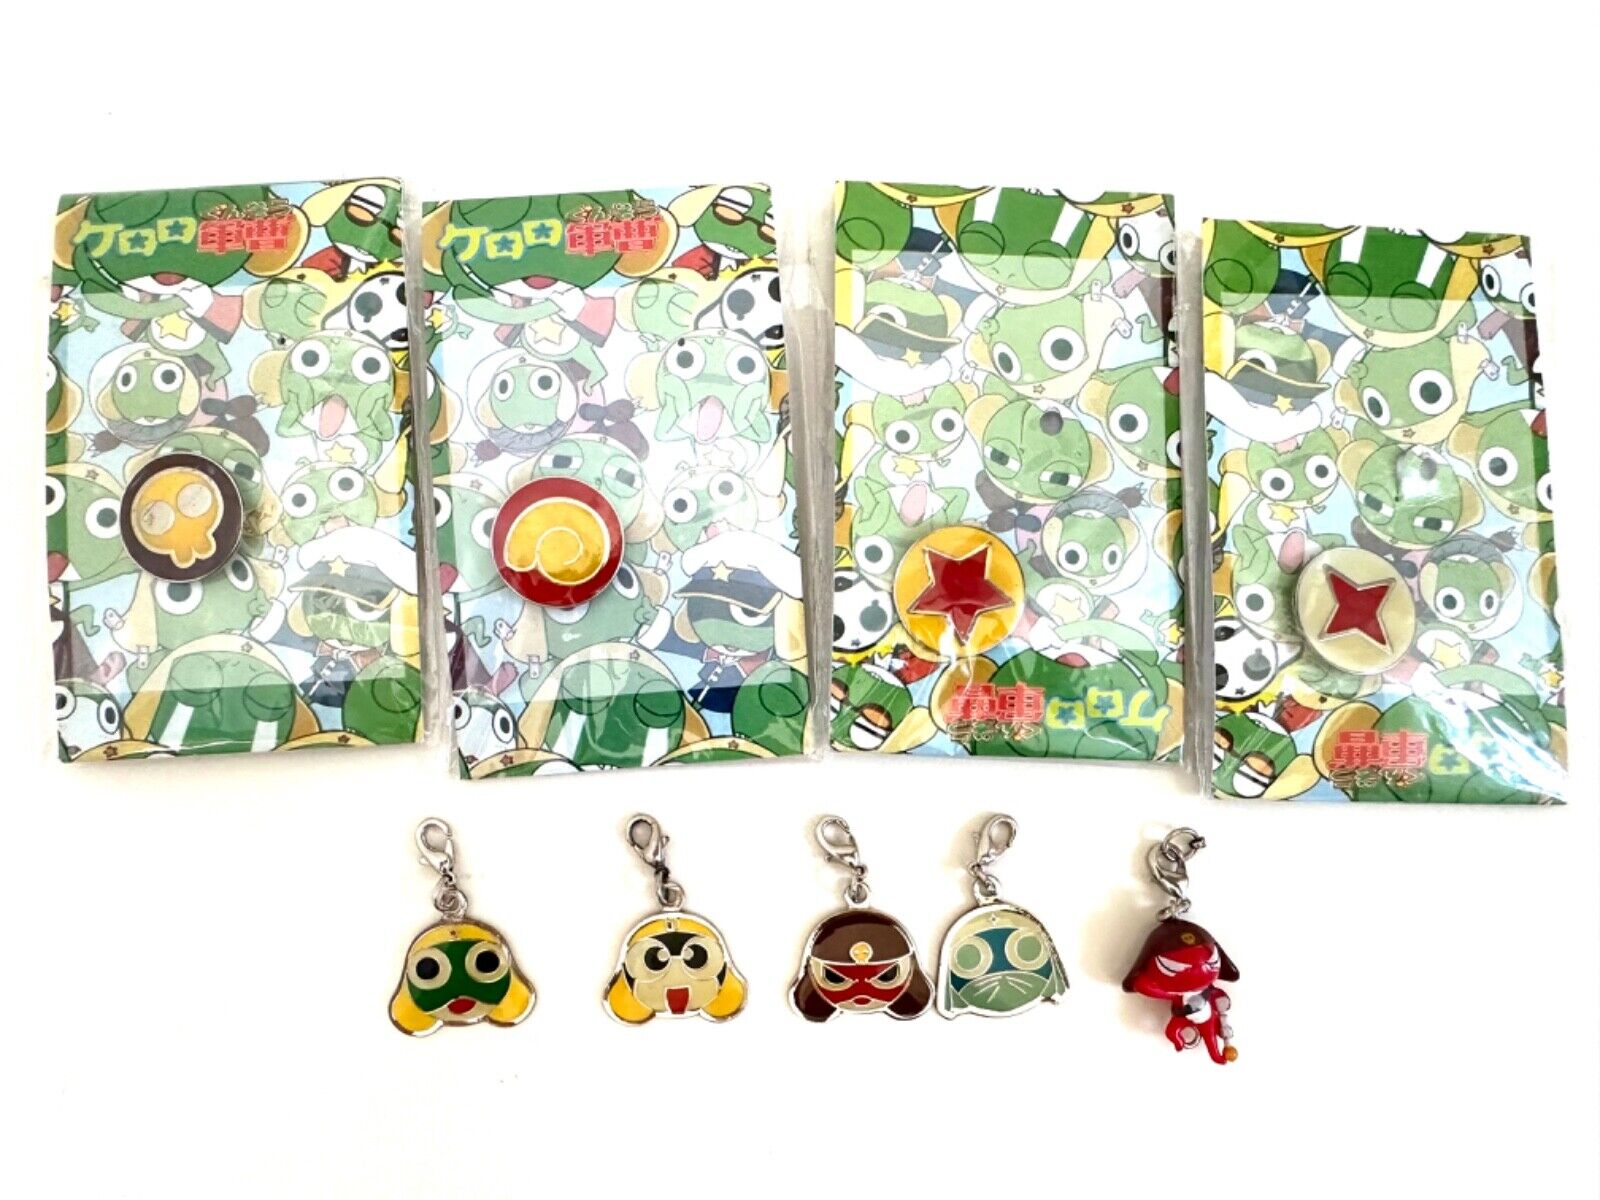 KERORO GUNSO JAPAN SERGEANT FROG FIGURE CHARACTER PINS CHARMS COLLECTION SET